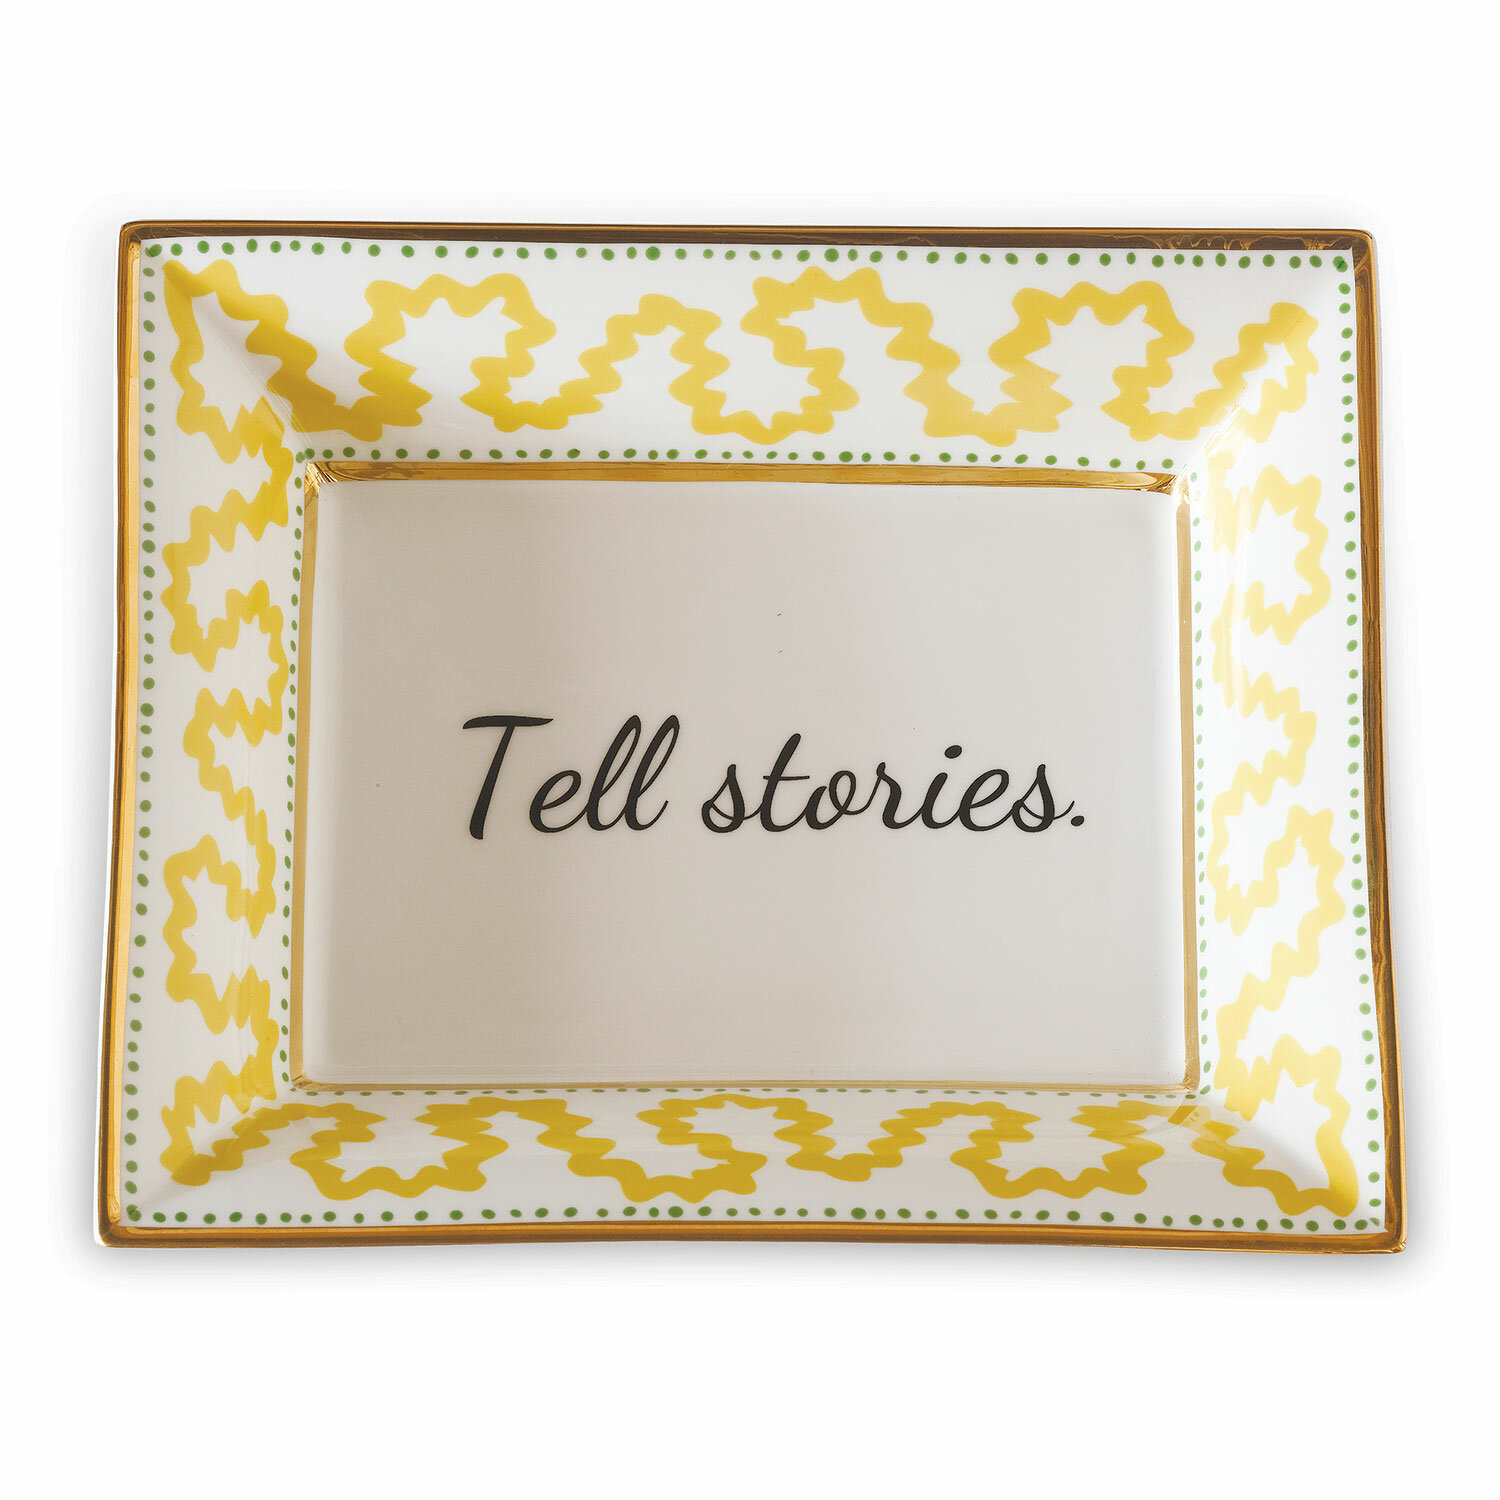 Tell Stories Plate